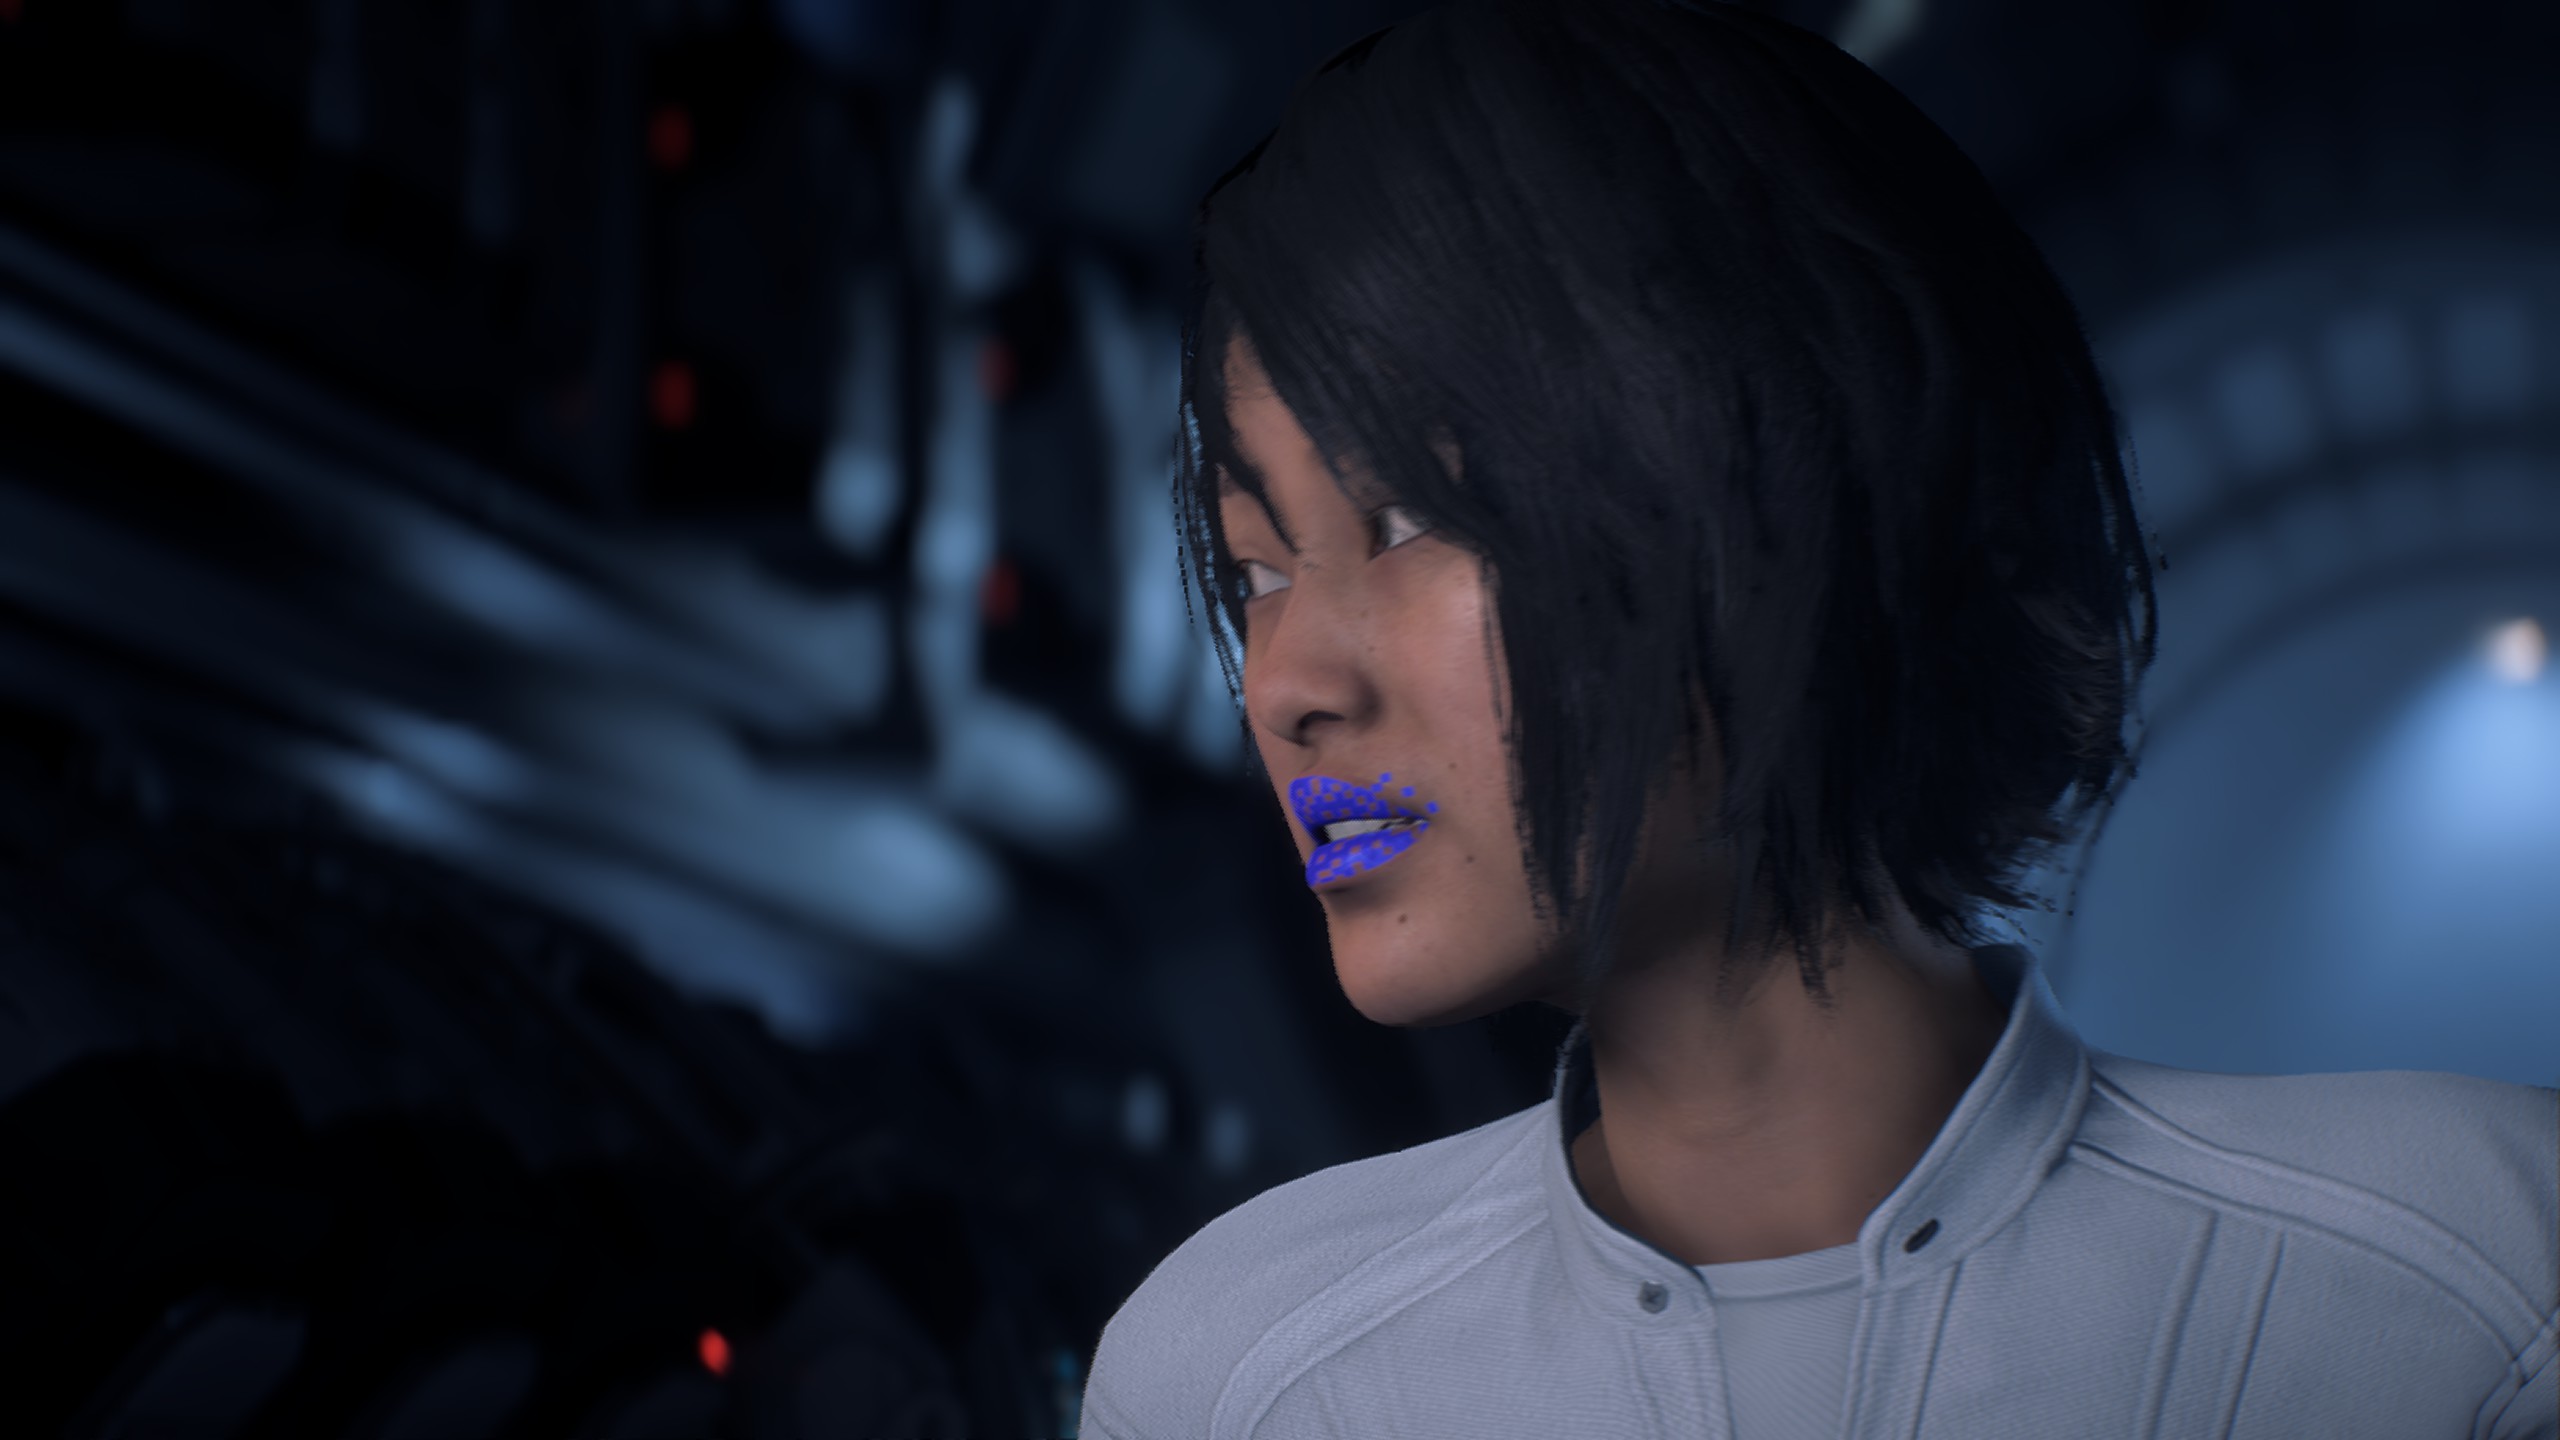 Mass Effect Andromeda Lipstick Style Comparison With GirlGreyBeauty #1